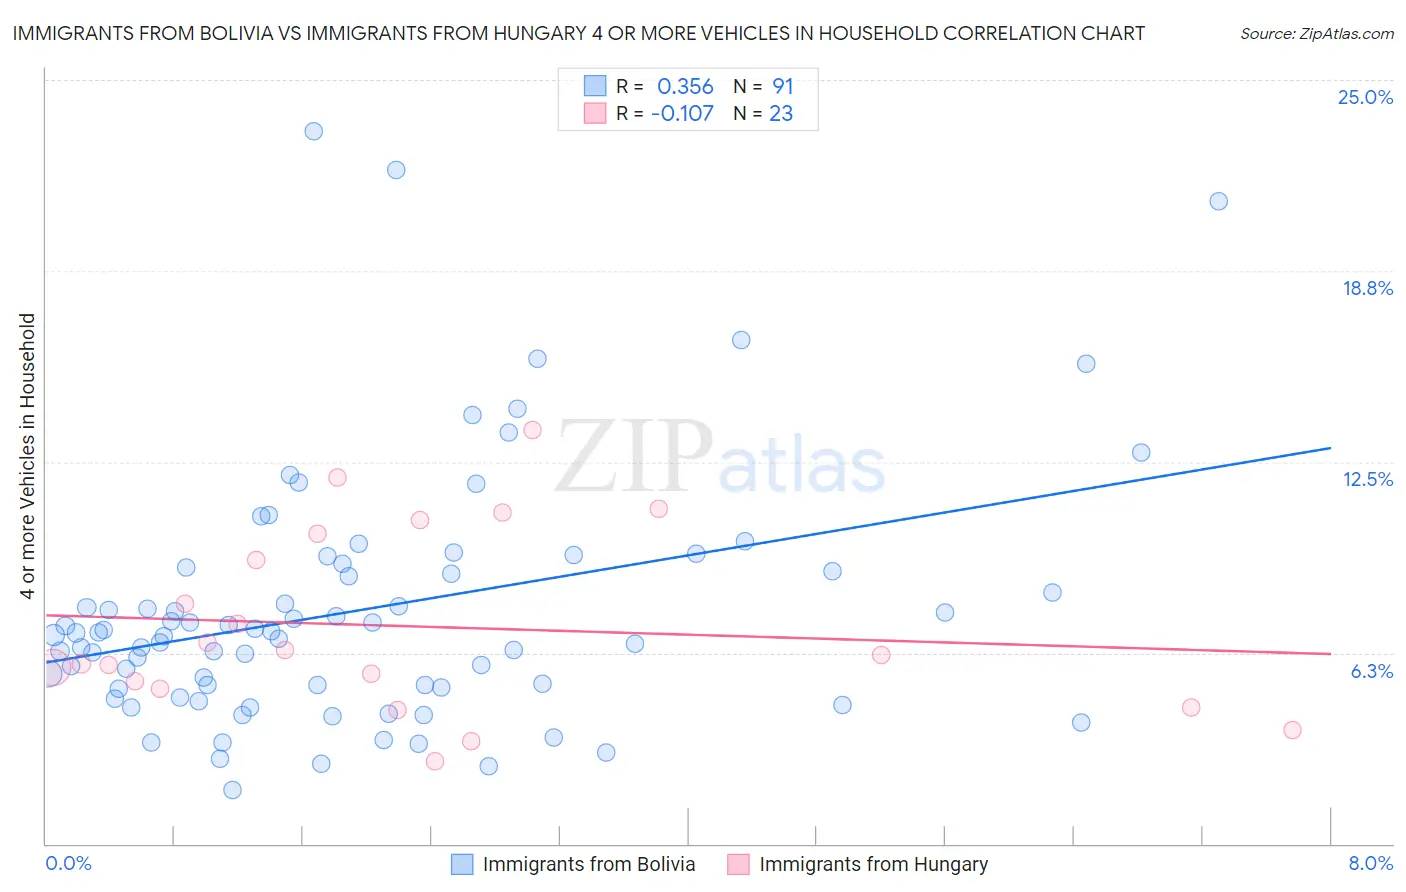 Immigrants from Bolivia vs Immigrants from Hungary 4 or more Vehicles in Household